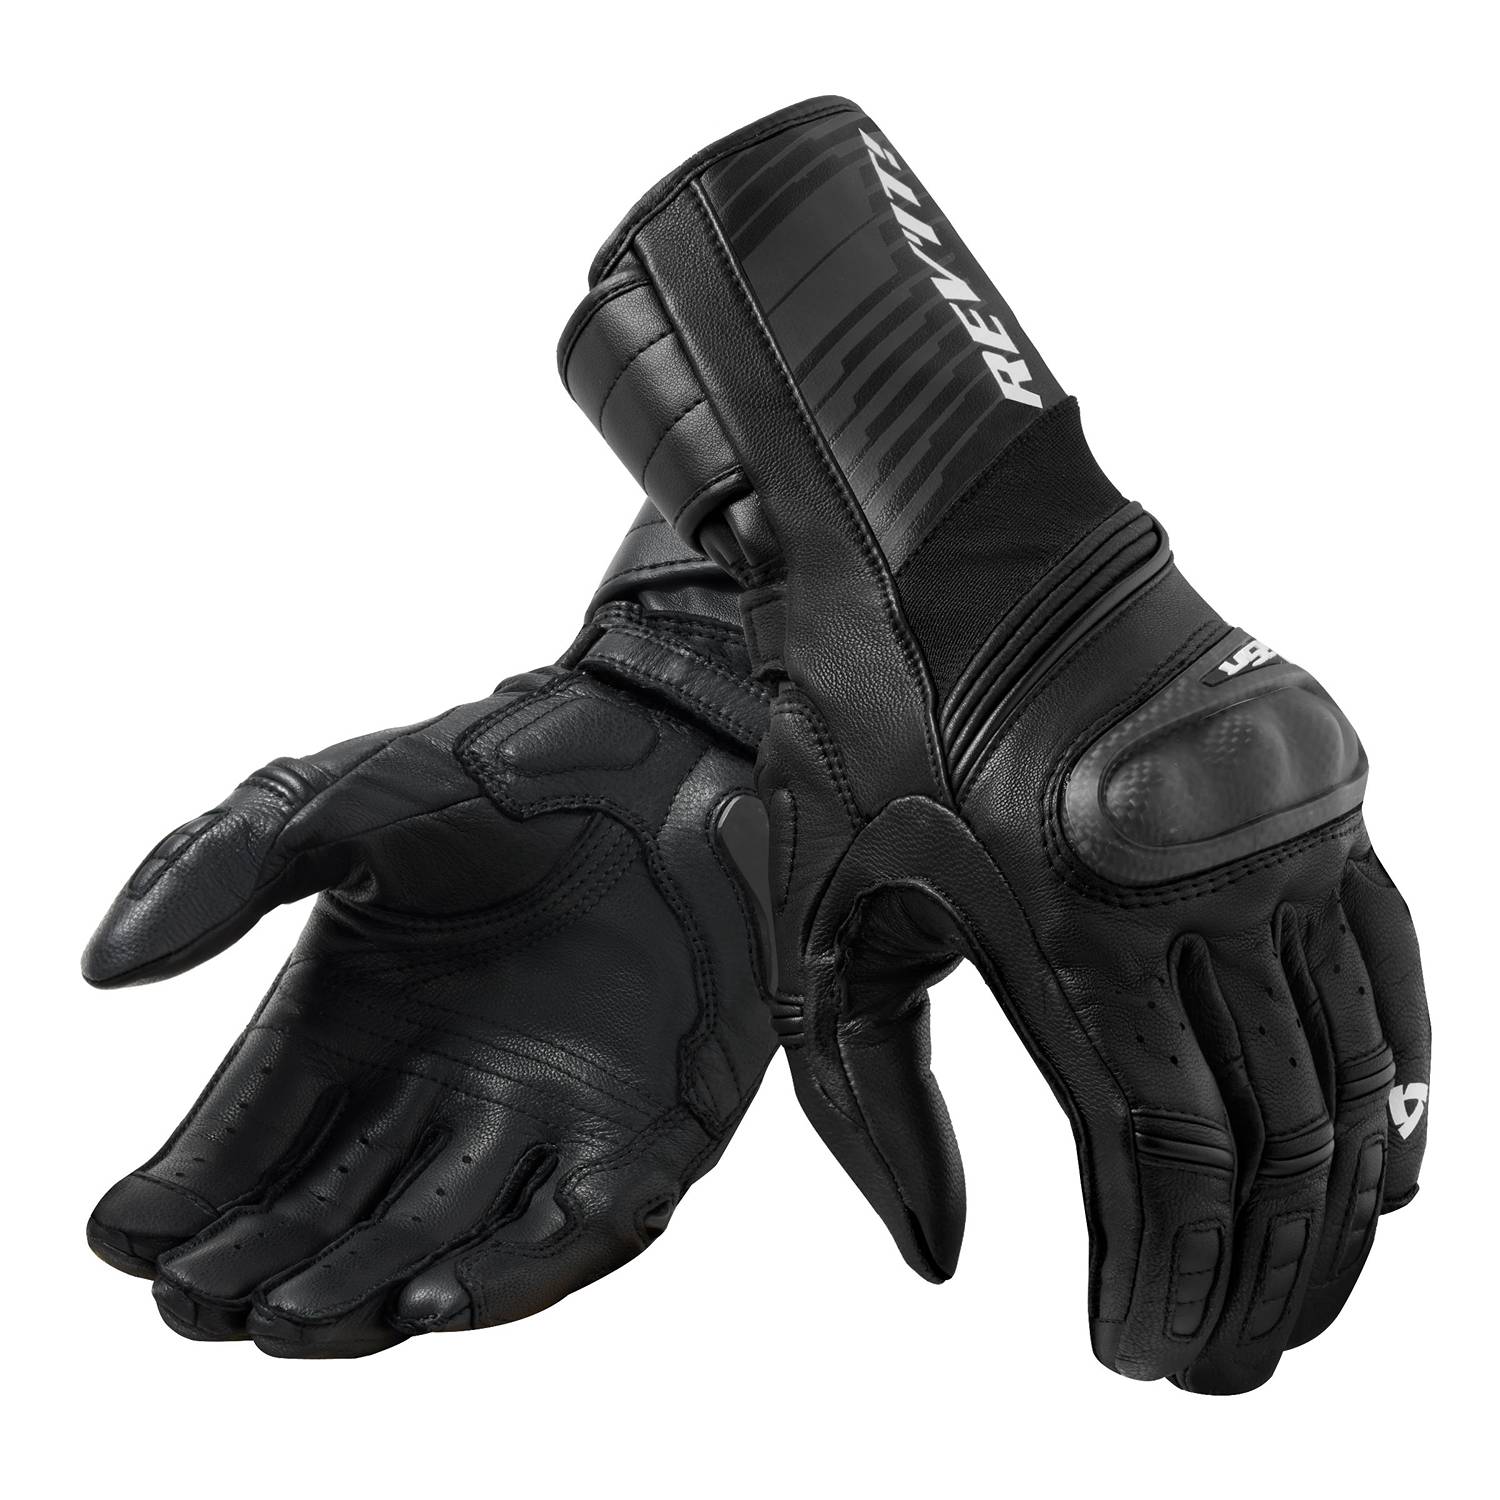 Image of REV'IT! RSR 4 Gloves Black Anthracite Size XL ID 8700001306706